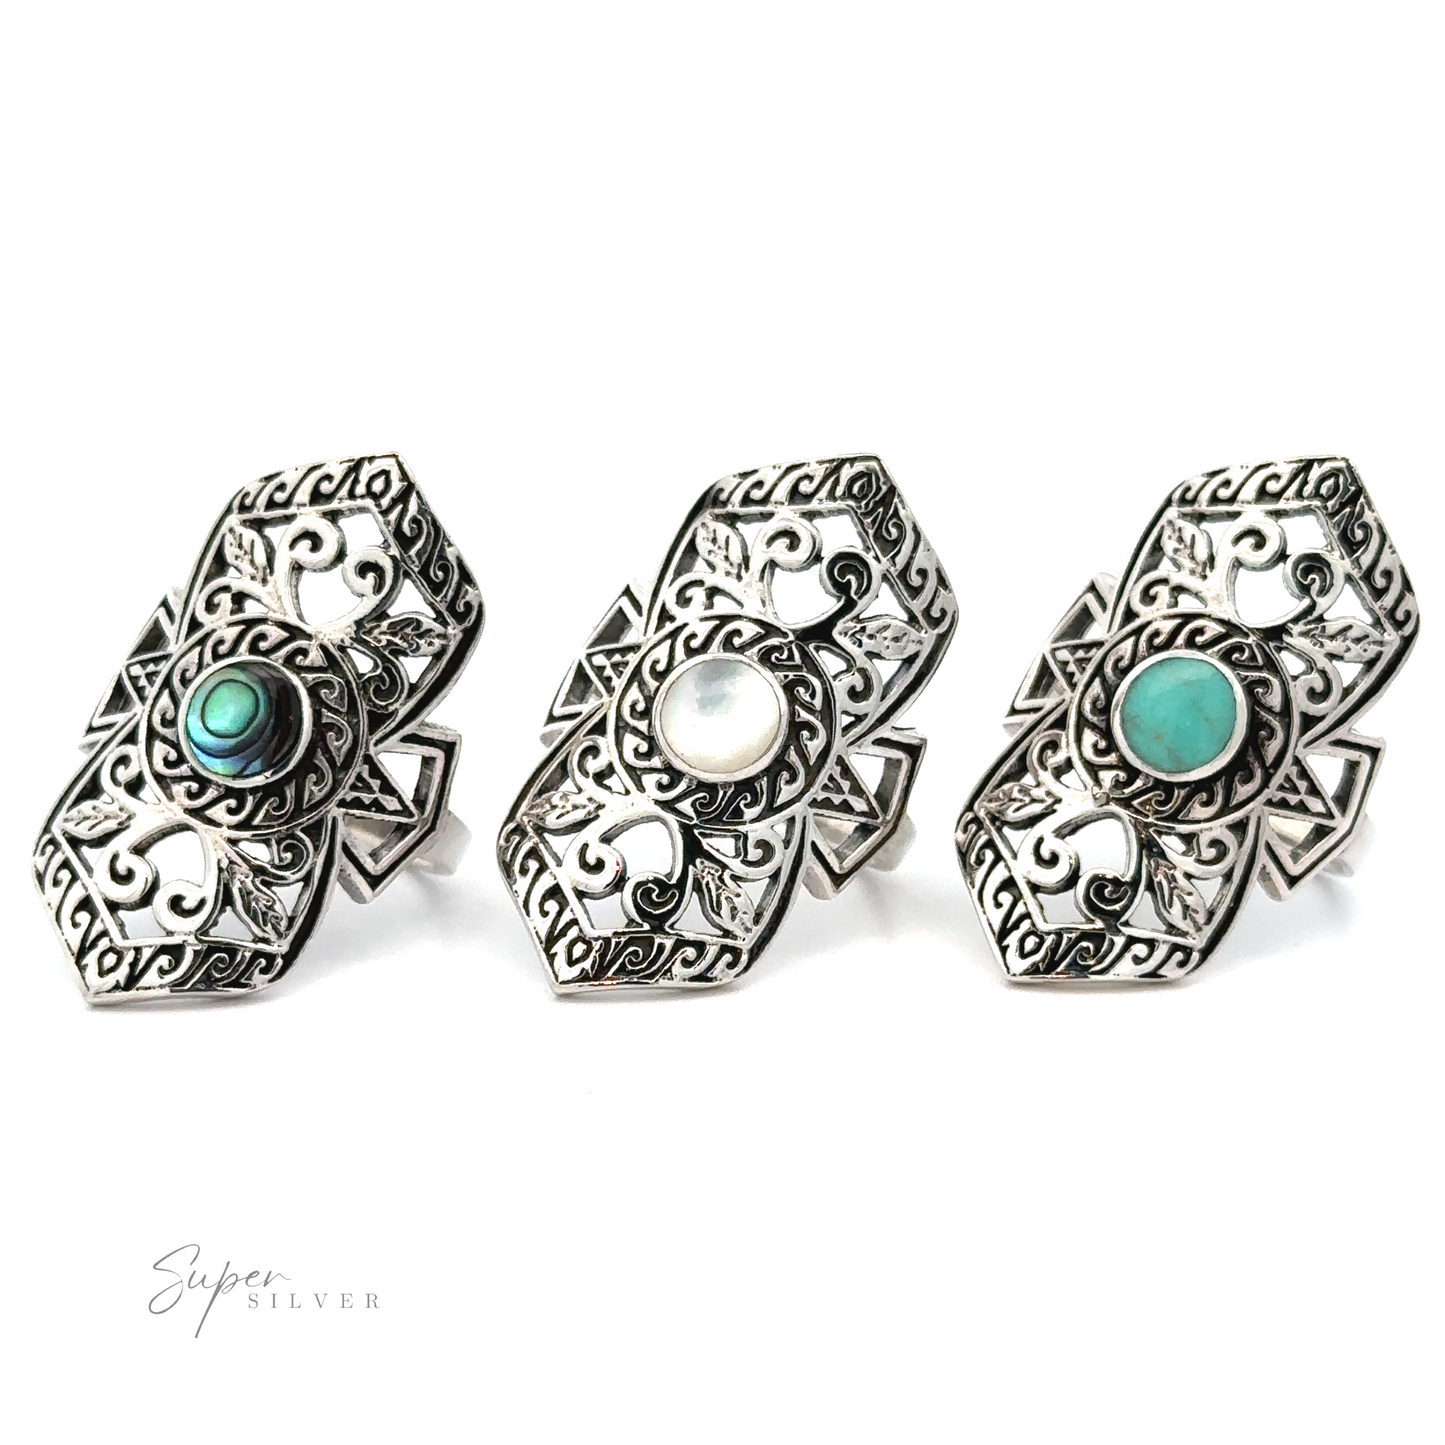 Three Elaborate Filigree Shield Rings adorned with turquoise stones.